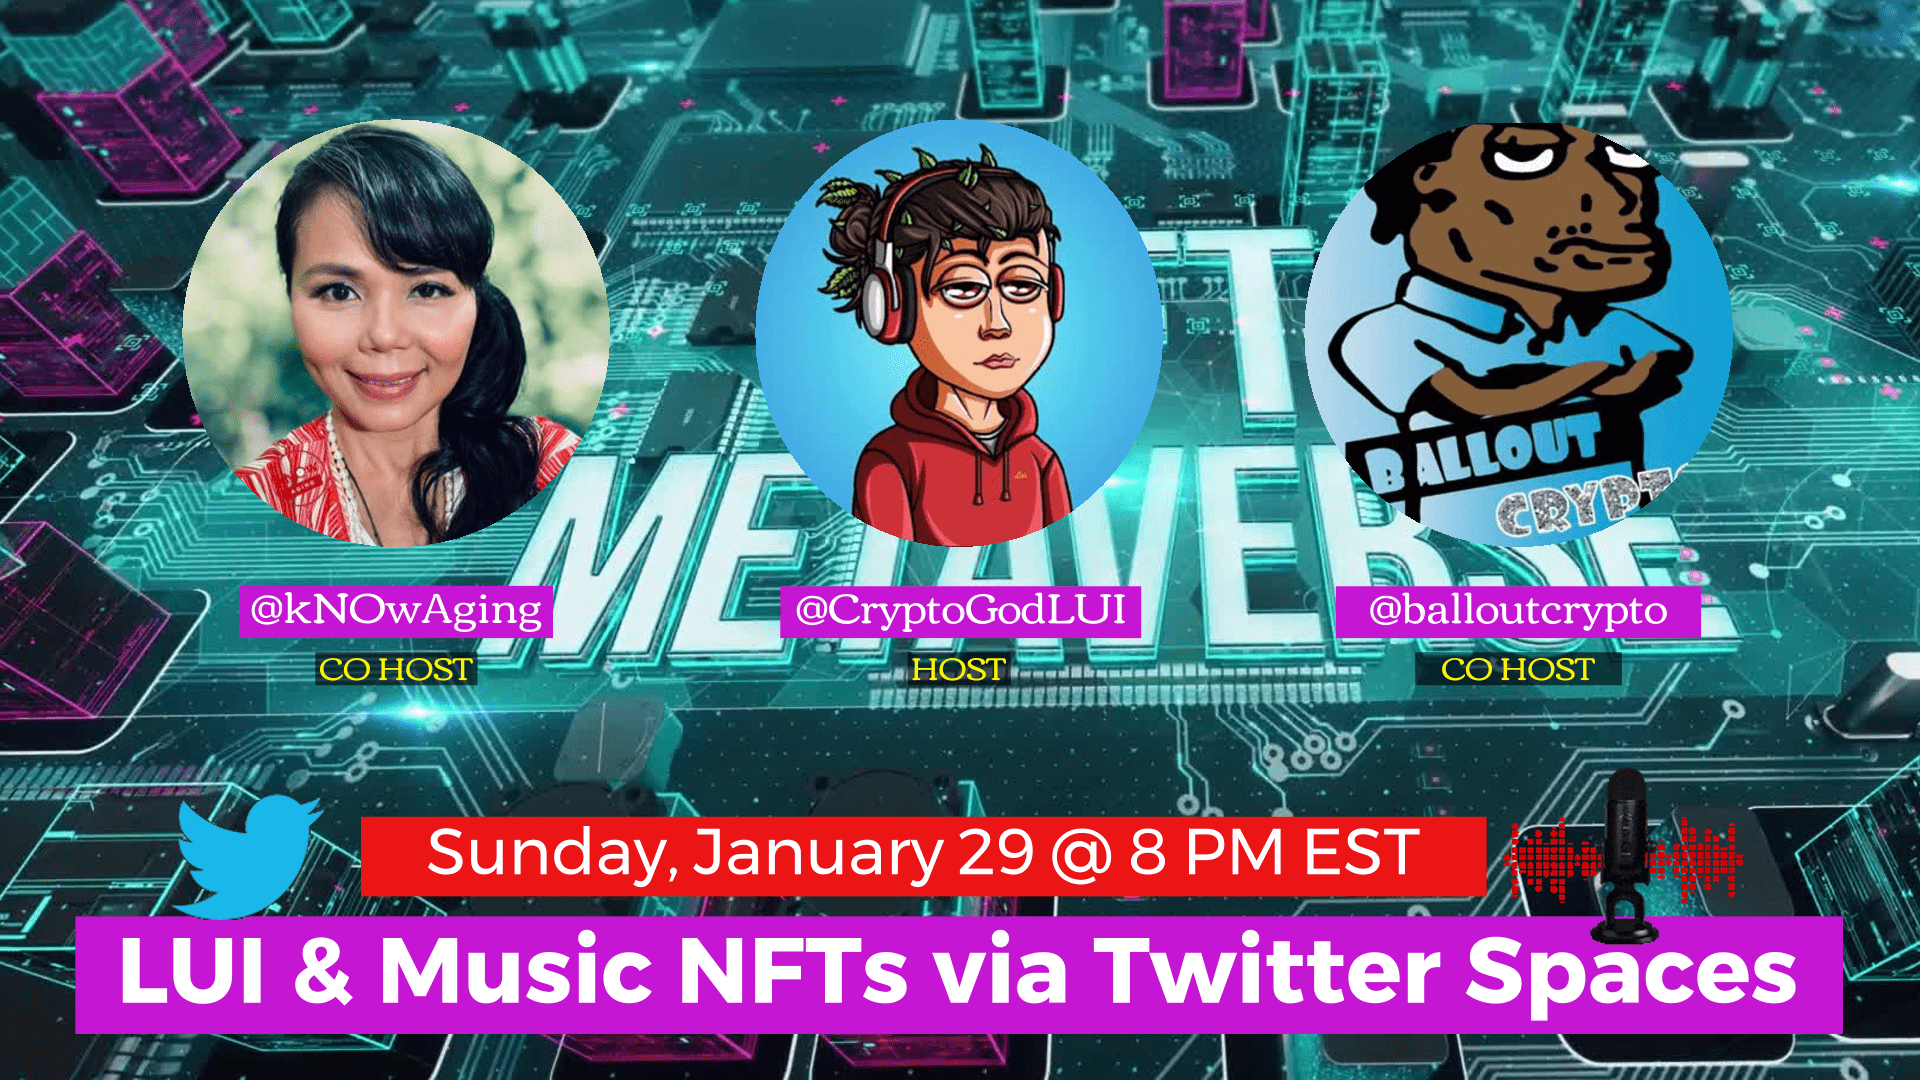 Join Host, @Cryptogodlui, and Co-Hosts @knowaging & @balloutcrypto for LUI & Music NFTs via Twitter Spaces. Sharing Updates, Music, Stories and WEB3.